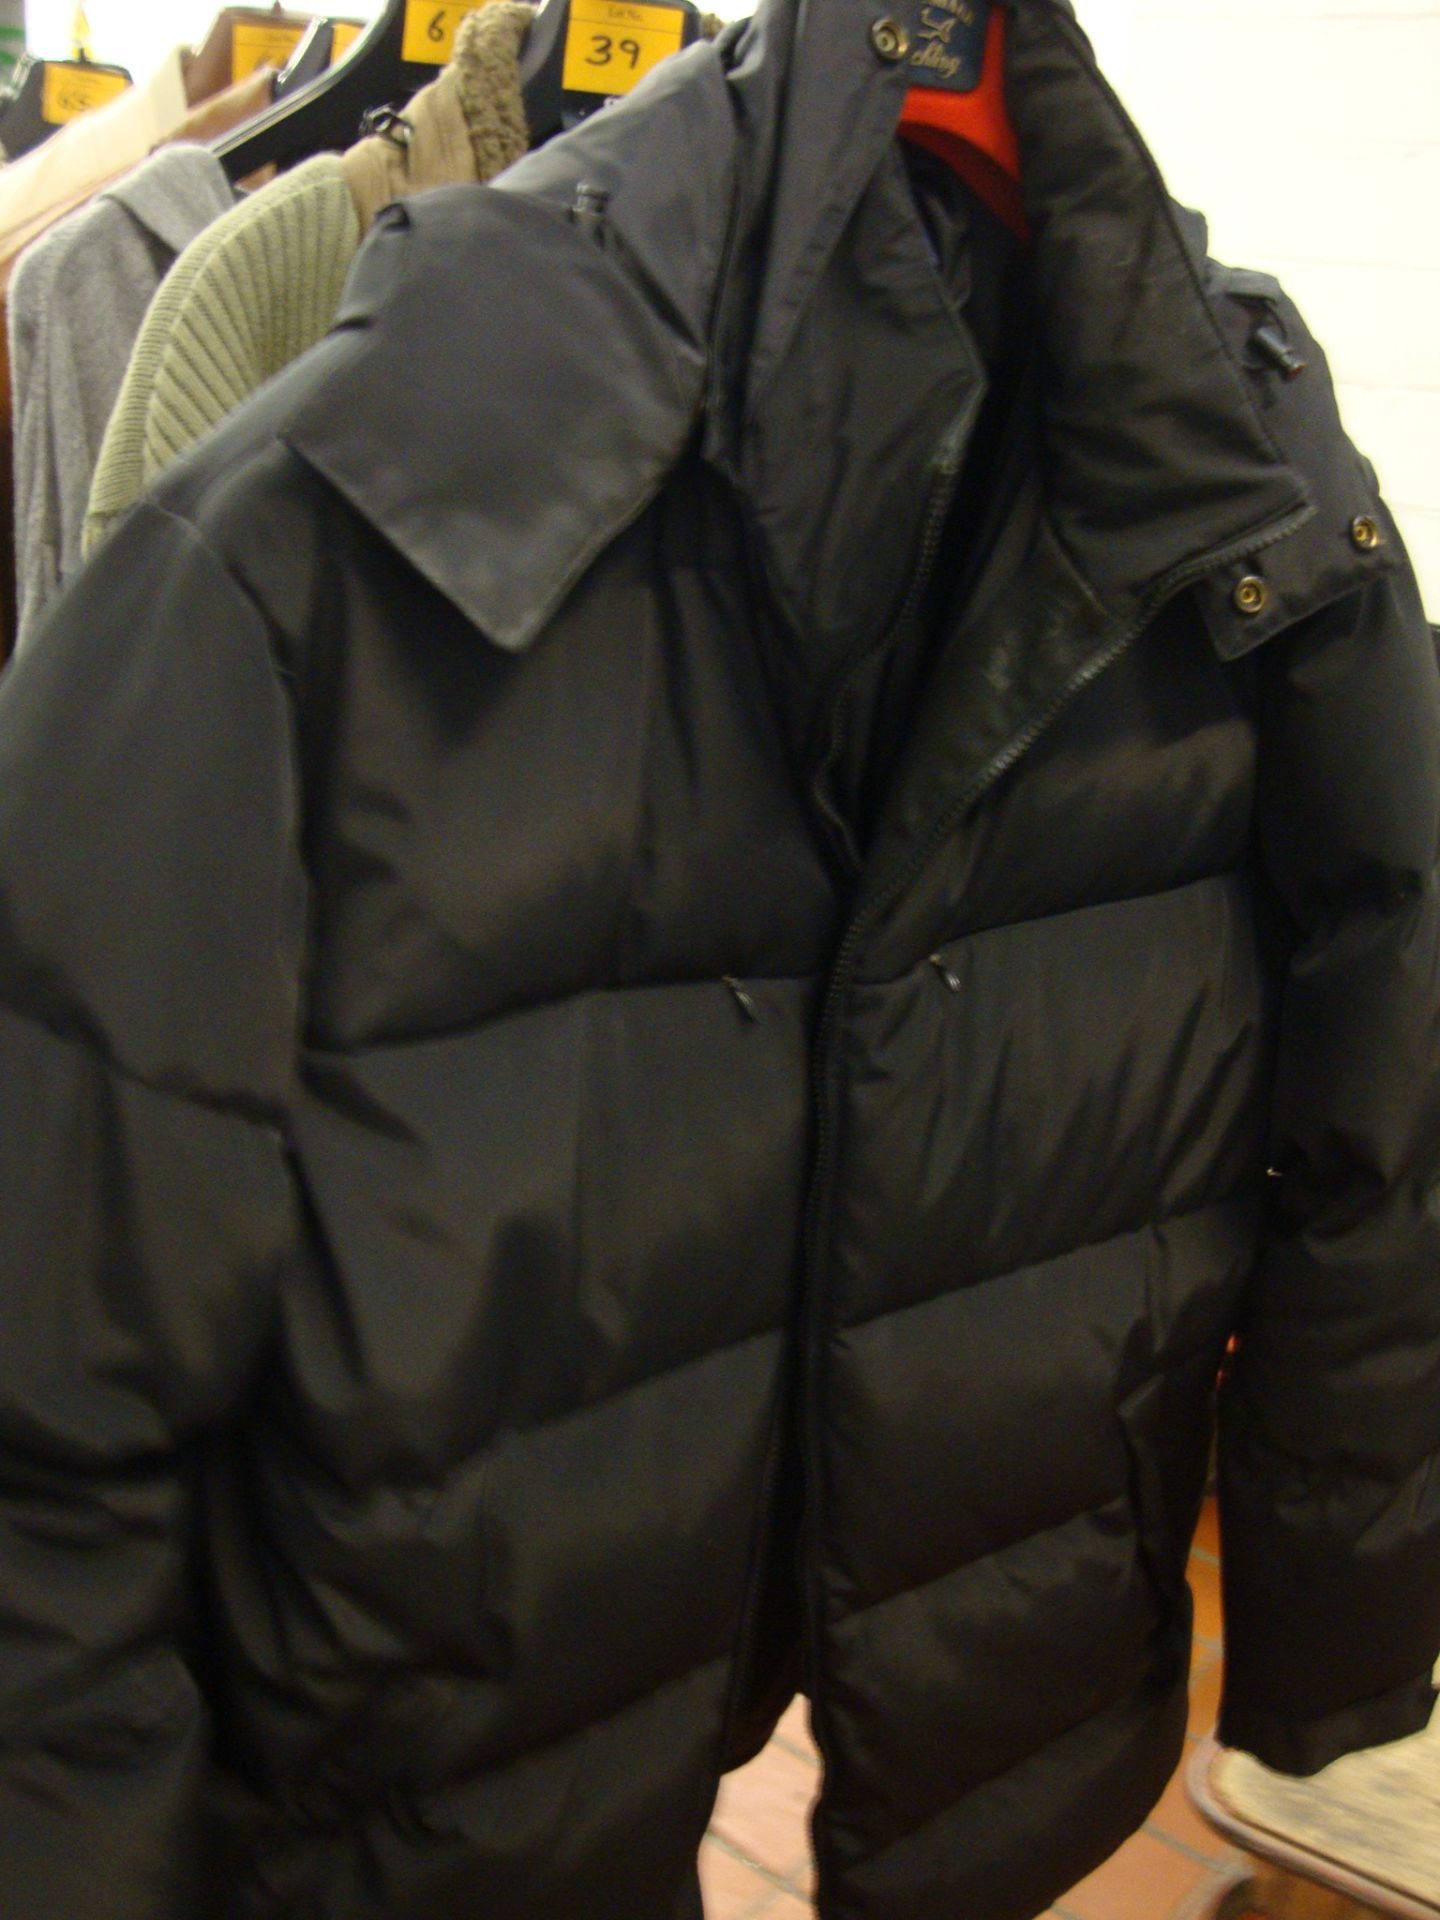 Paul & Shark yachting black "puffer" jacket with detachable hood that can fit inside the collar.